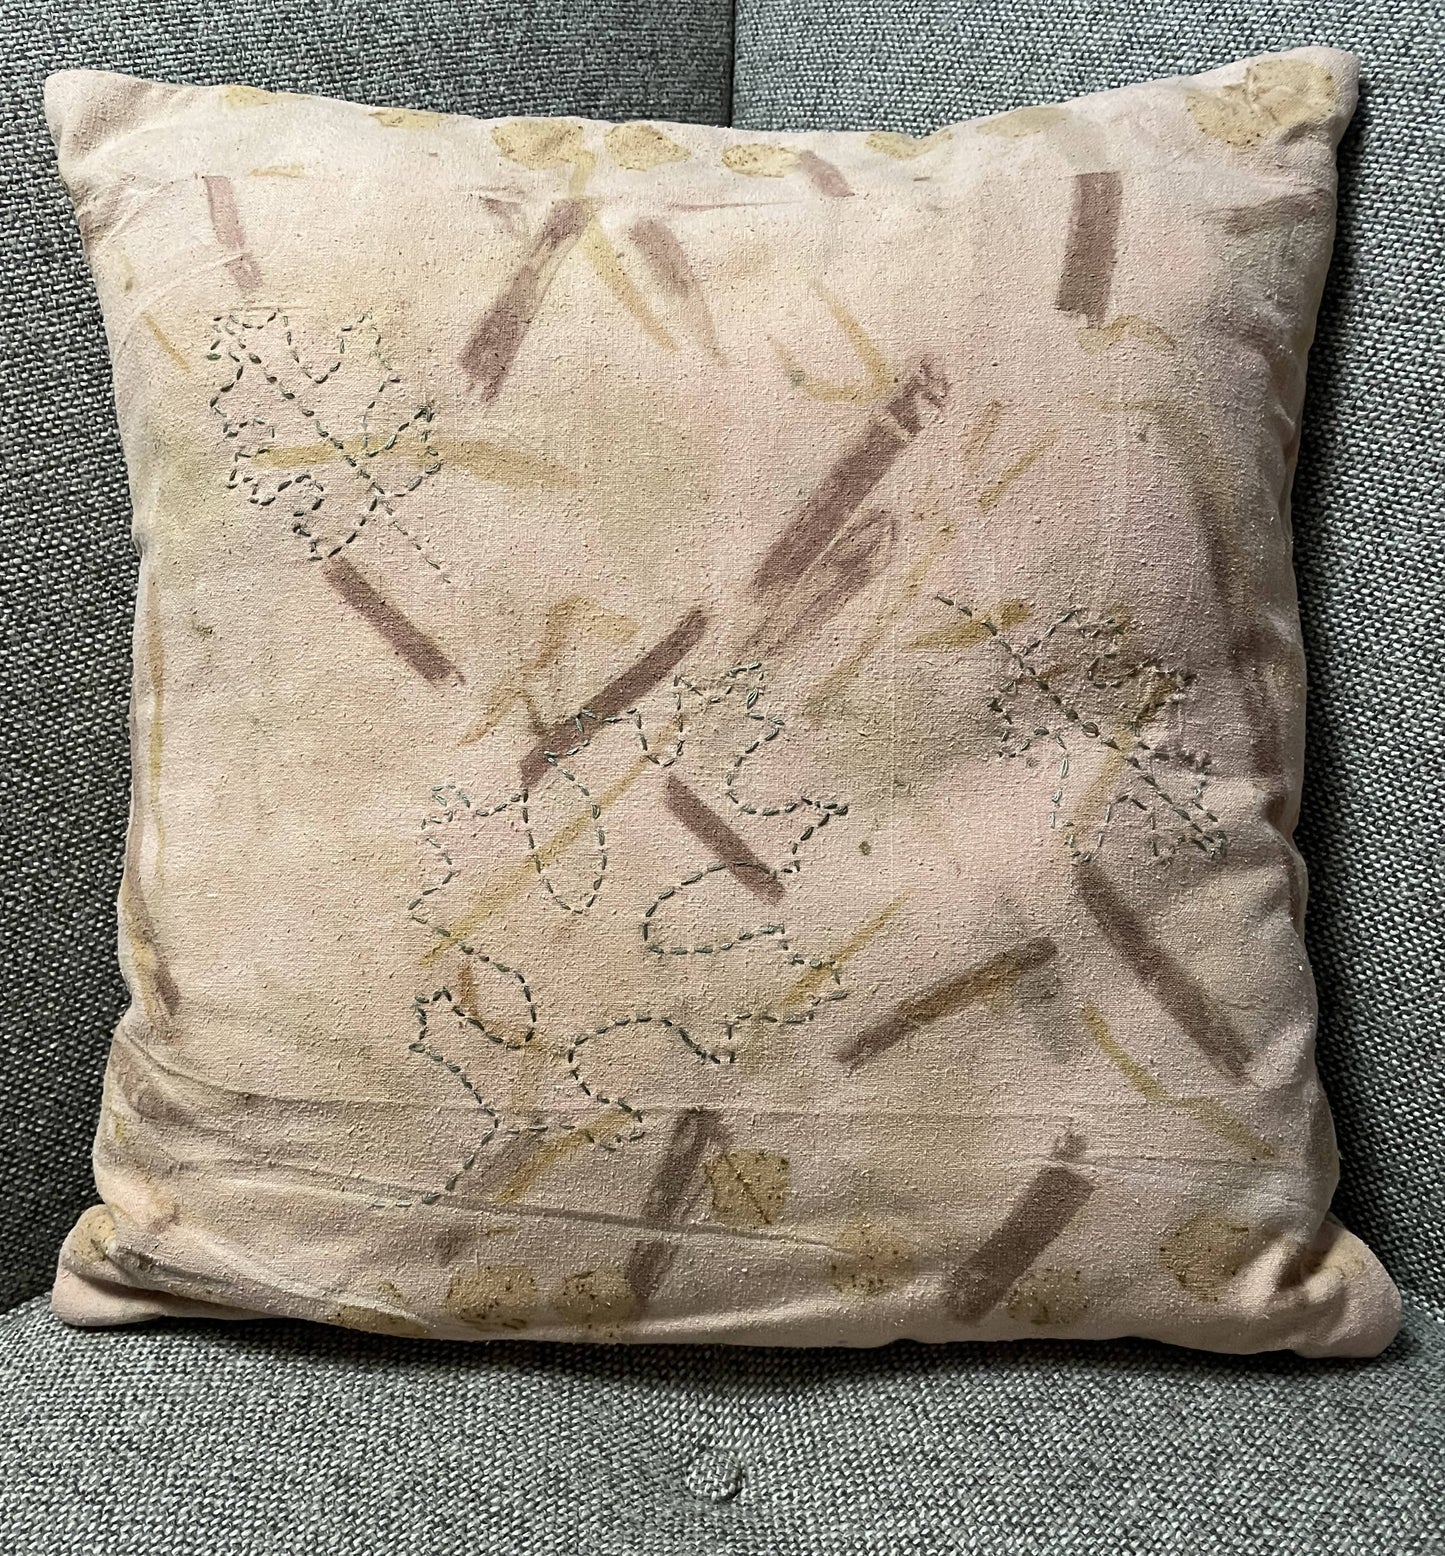 Pillow Cover with hand embroidered oak leaves